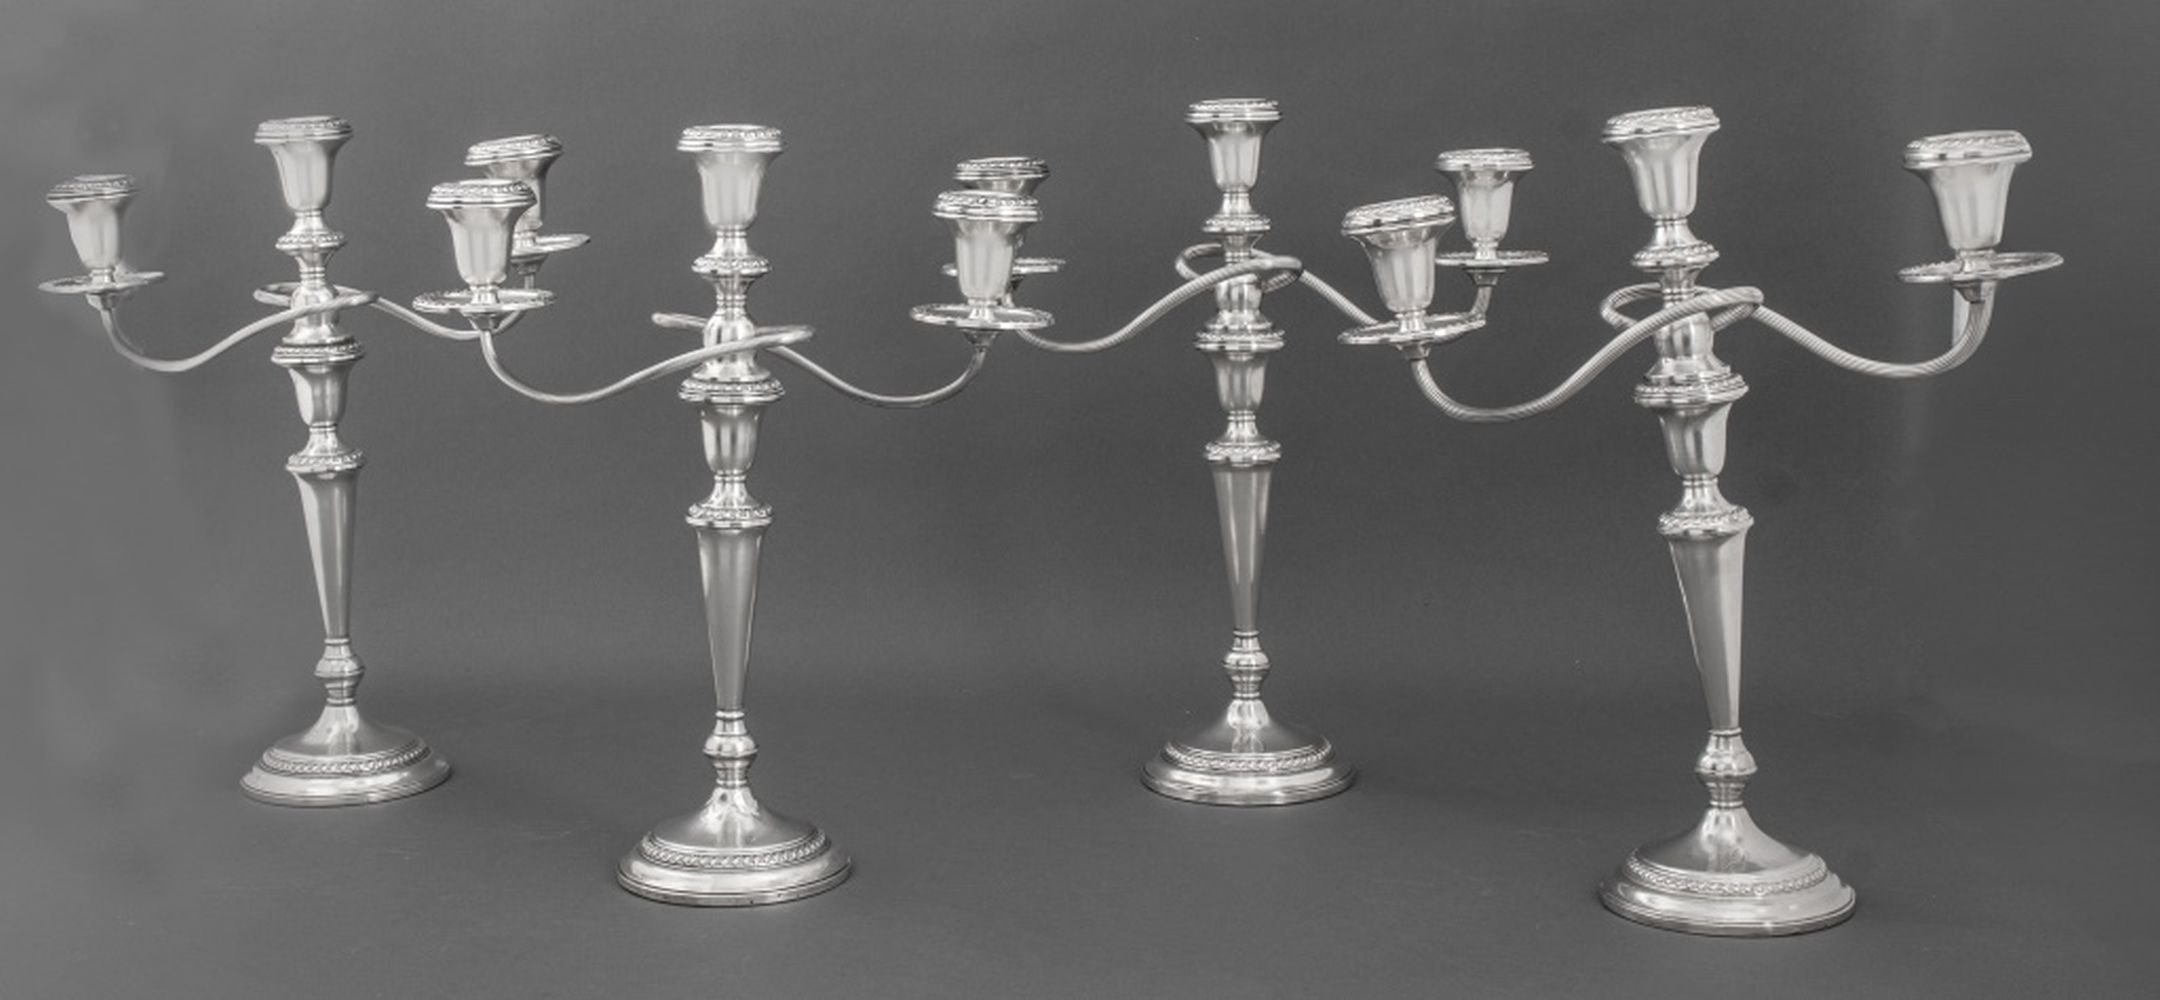 COLUMBIA STERLING SET OF FOUR BANQUET 3cecad